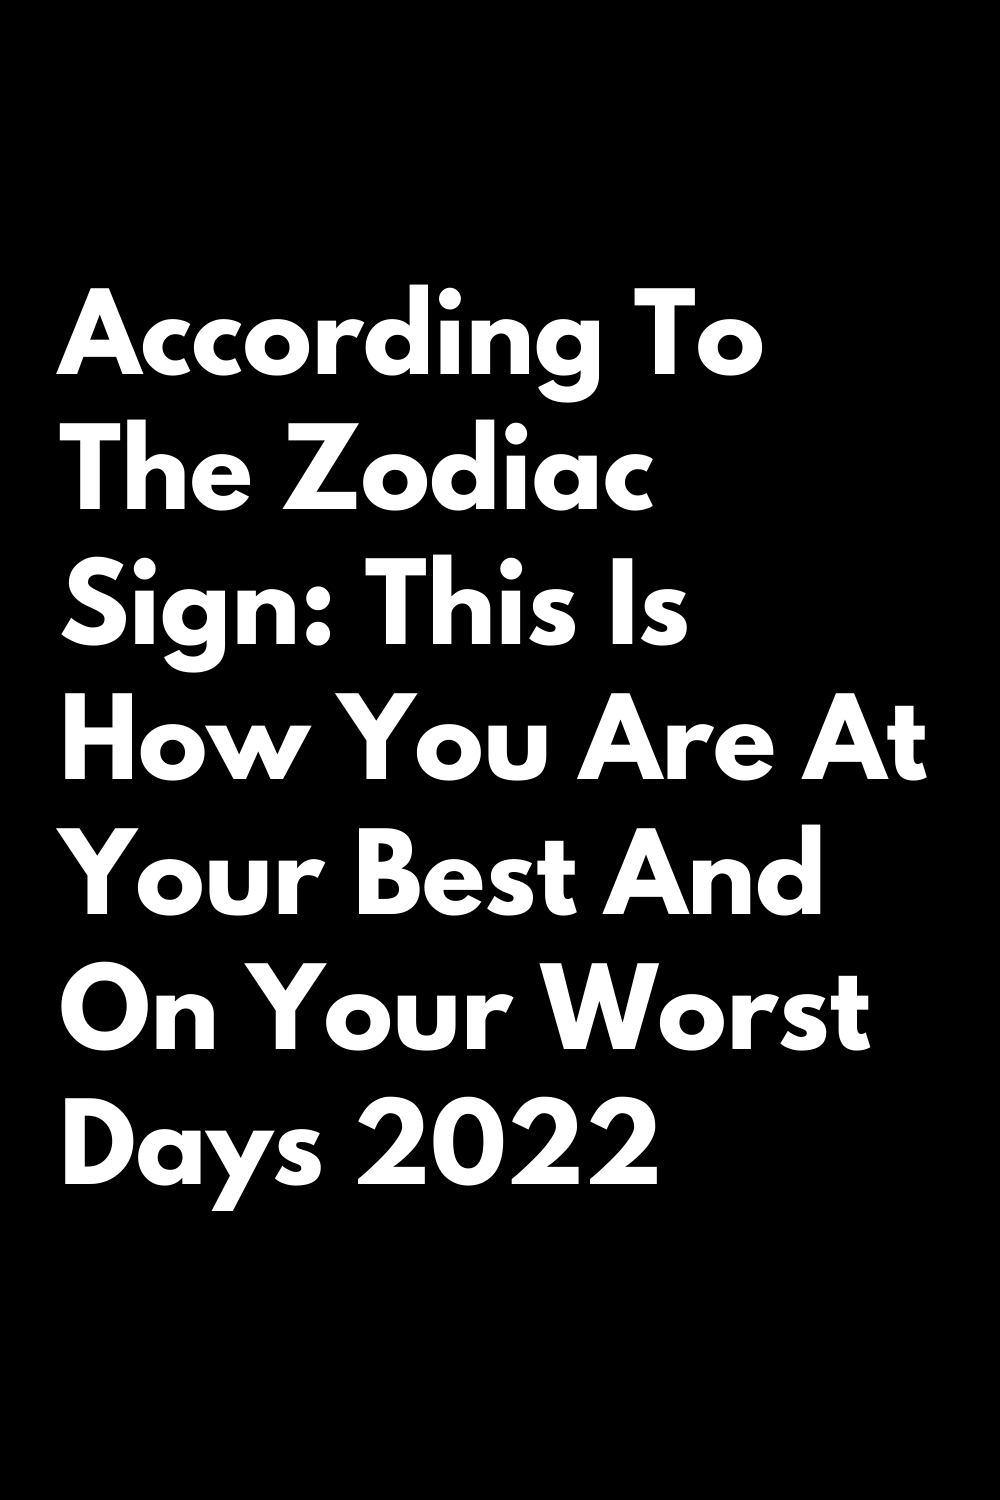 According To The Zodiac Sign: This Is How You Are At Your Best And On ...